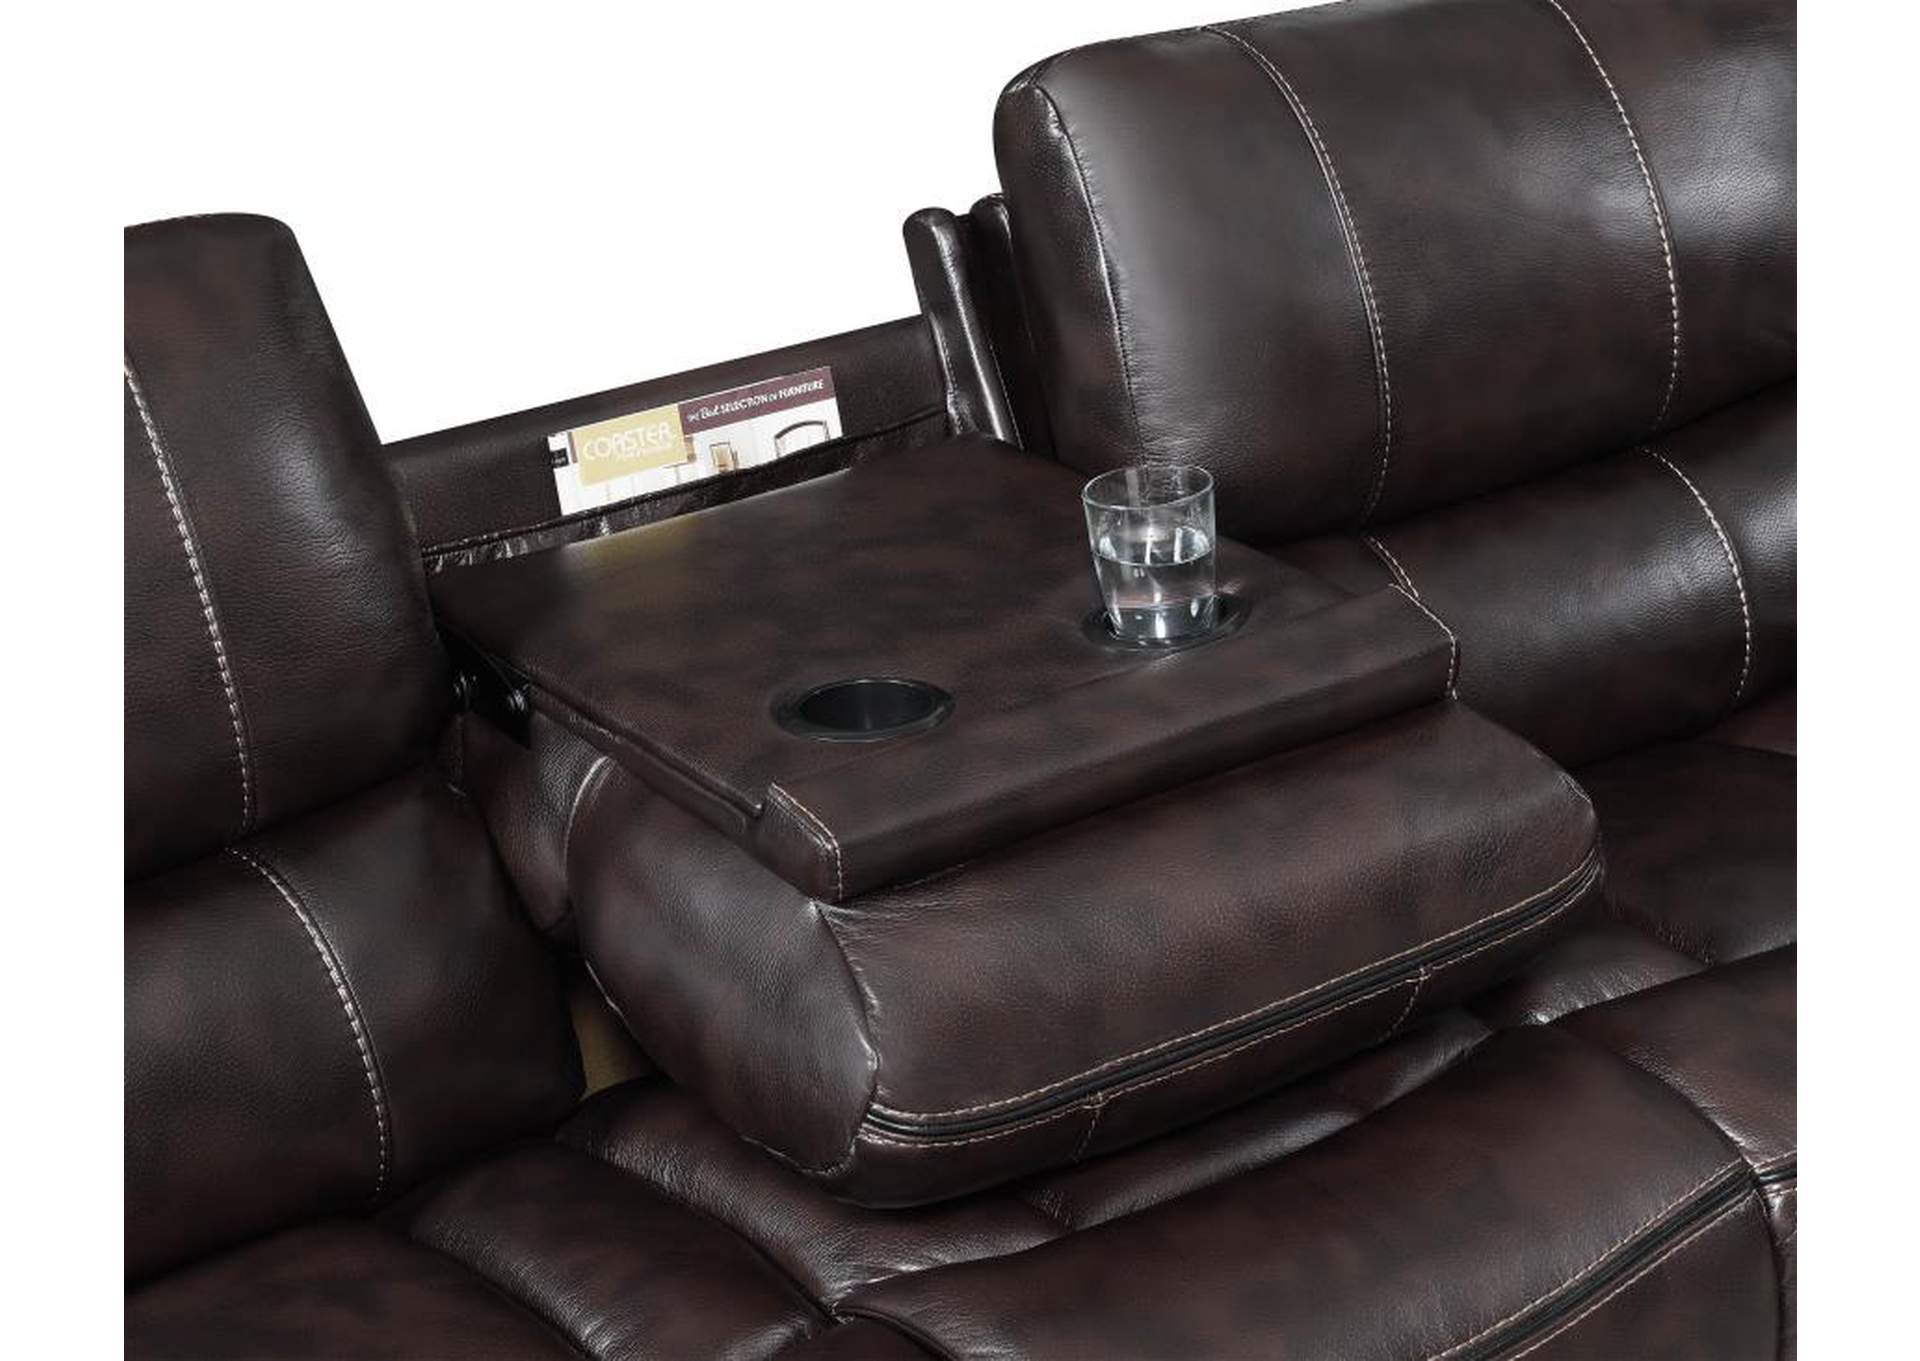 Willemse Motion Sofa with Drop-down Table Dark Brown,Coaster Furniture